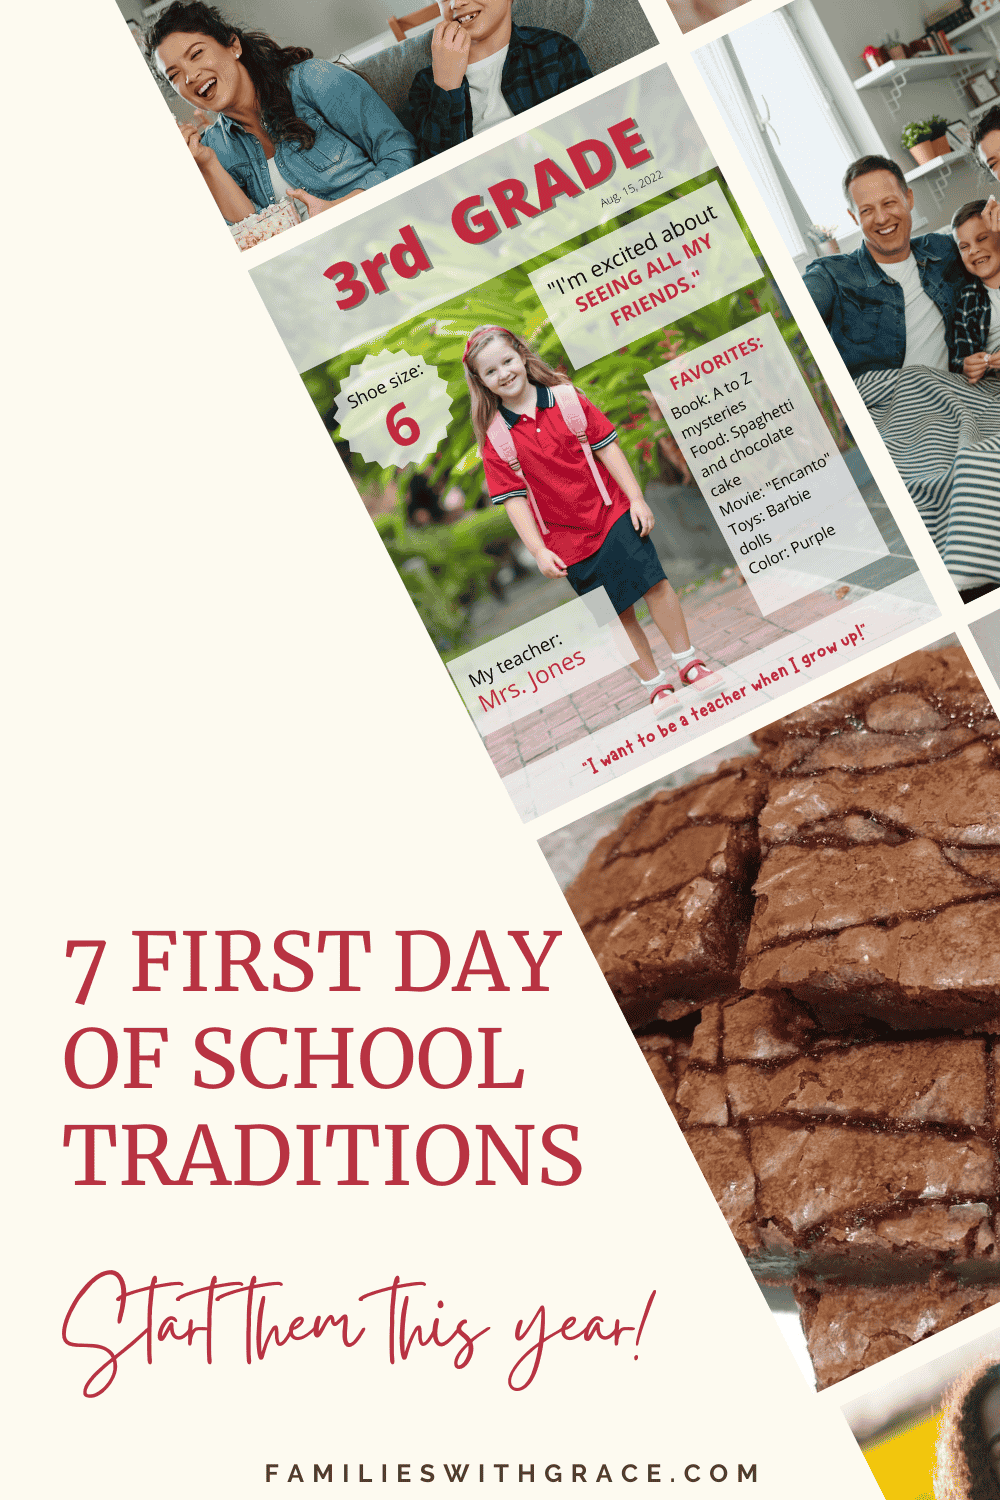 First day of school traditions to start this year